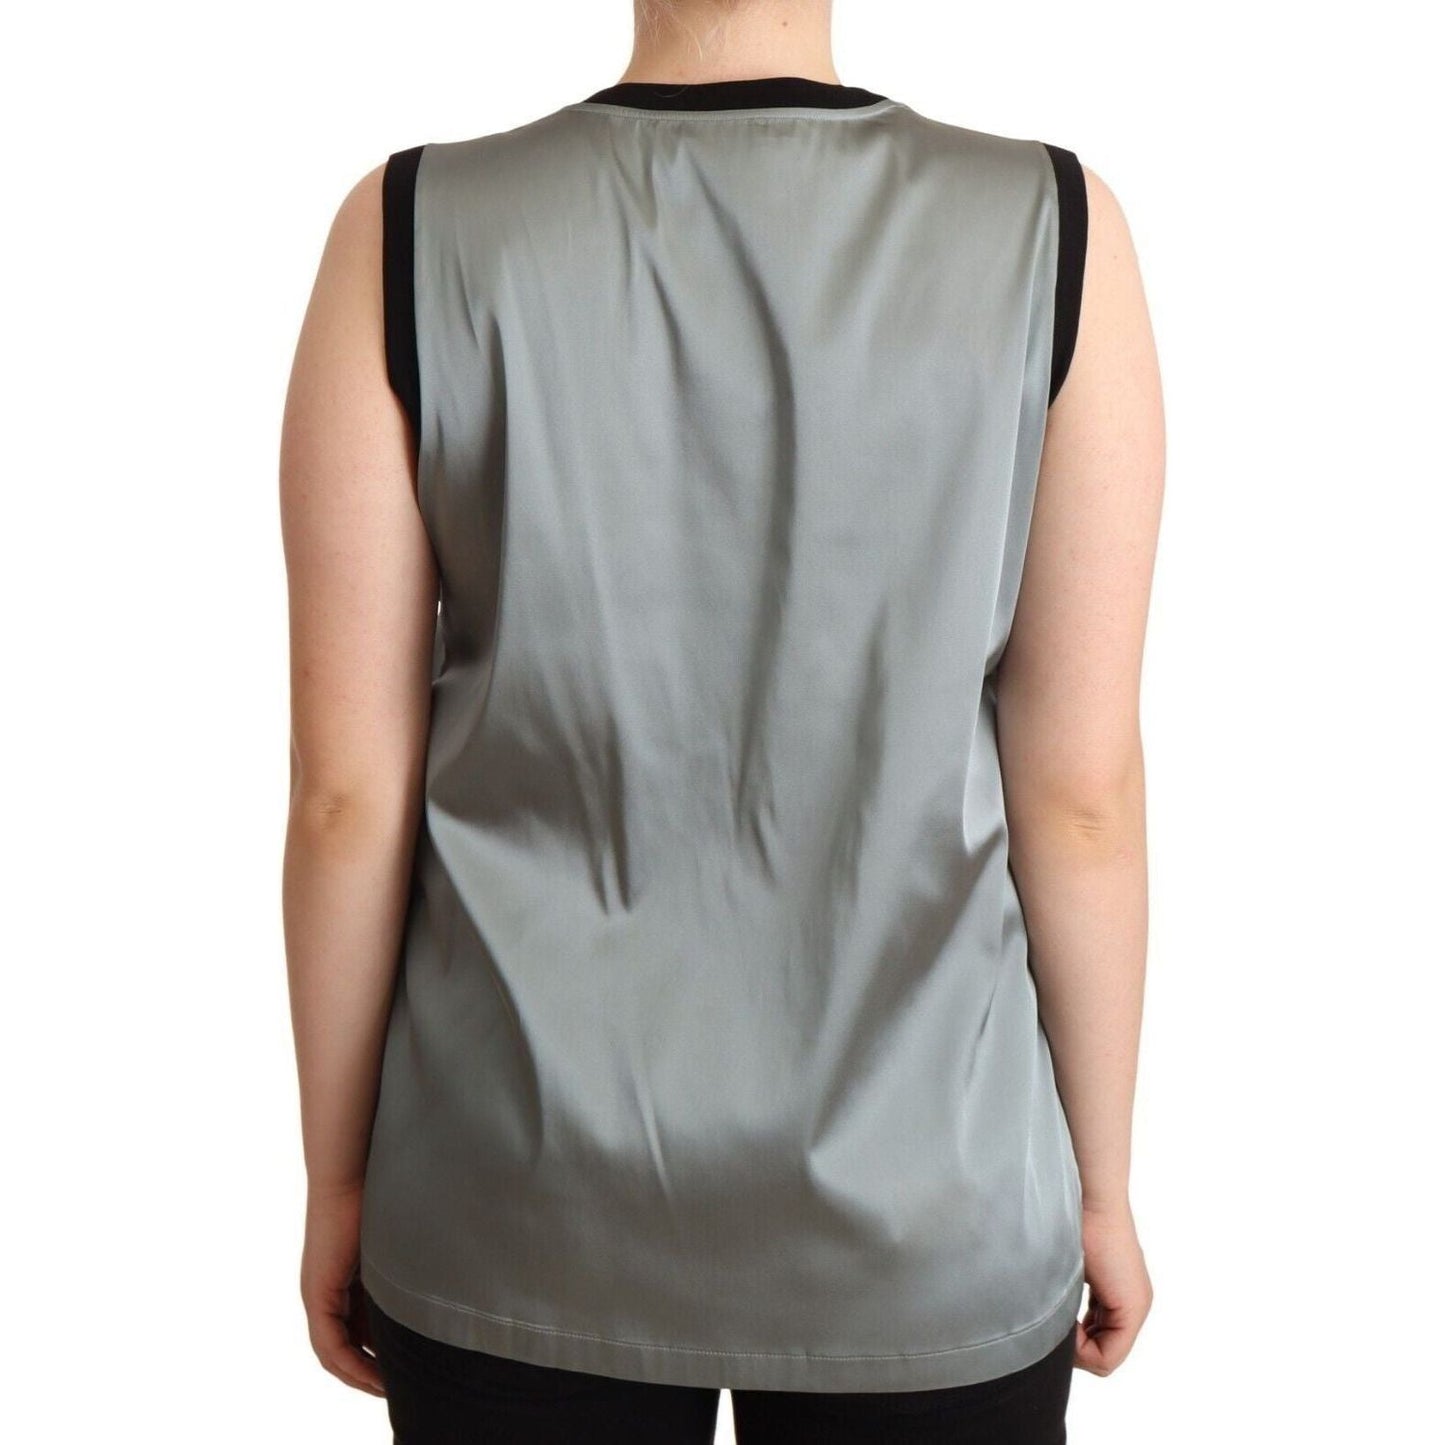 Dolce & Gabbana Elegant Silver Sleeveless Blouse WOMAN TOPS AND SHIRTS silver-round-neck-sleeveless-casual-tank-top s-l1600-3-100-c9c738d1-0cd.jpg